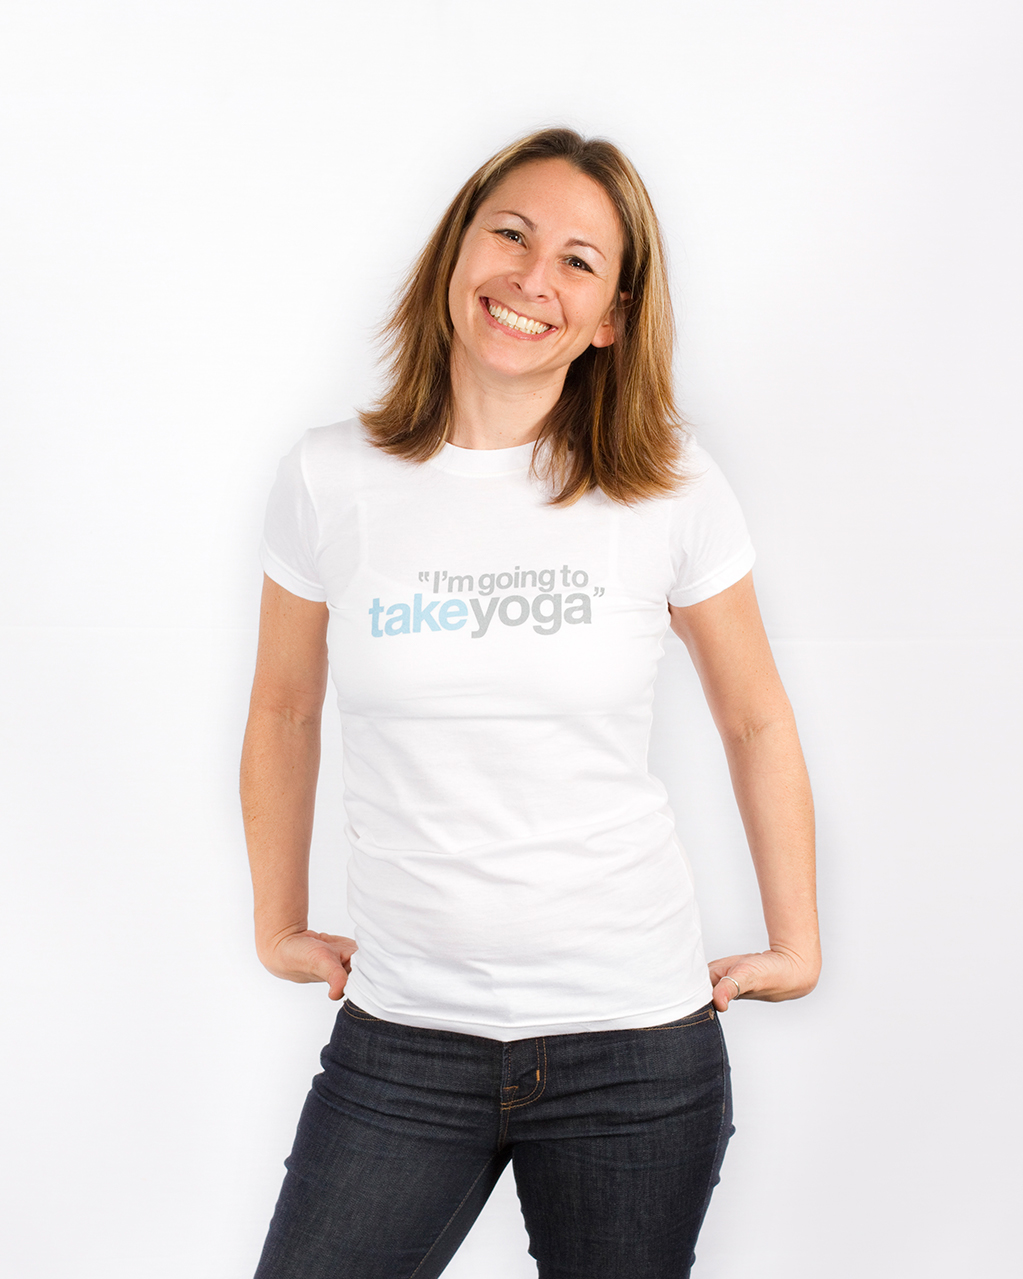 Take Yoga Photography  local business photography Nick Conti Promo Photography ad campaign marketing  